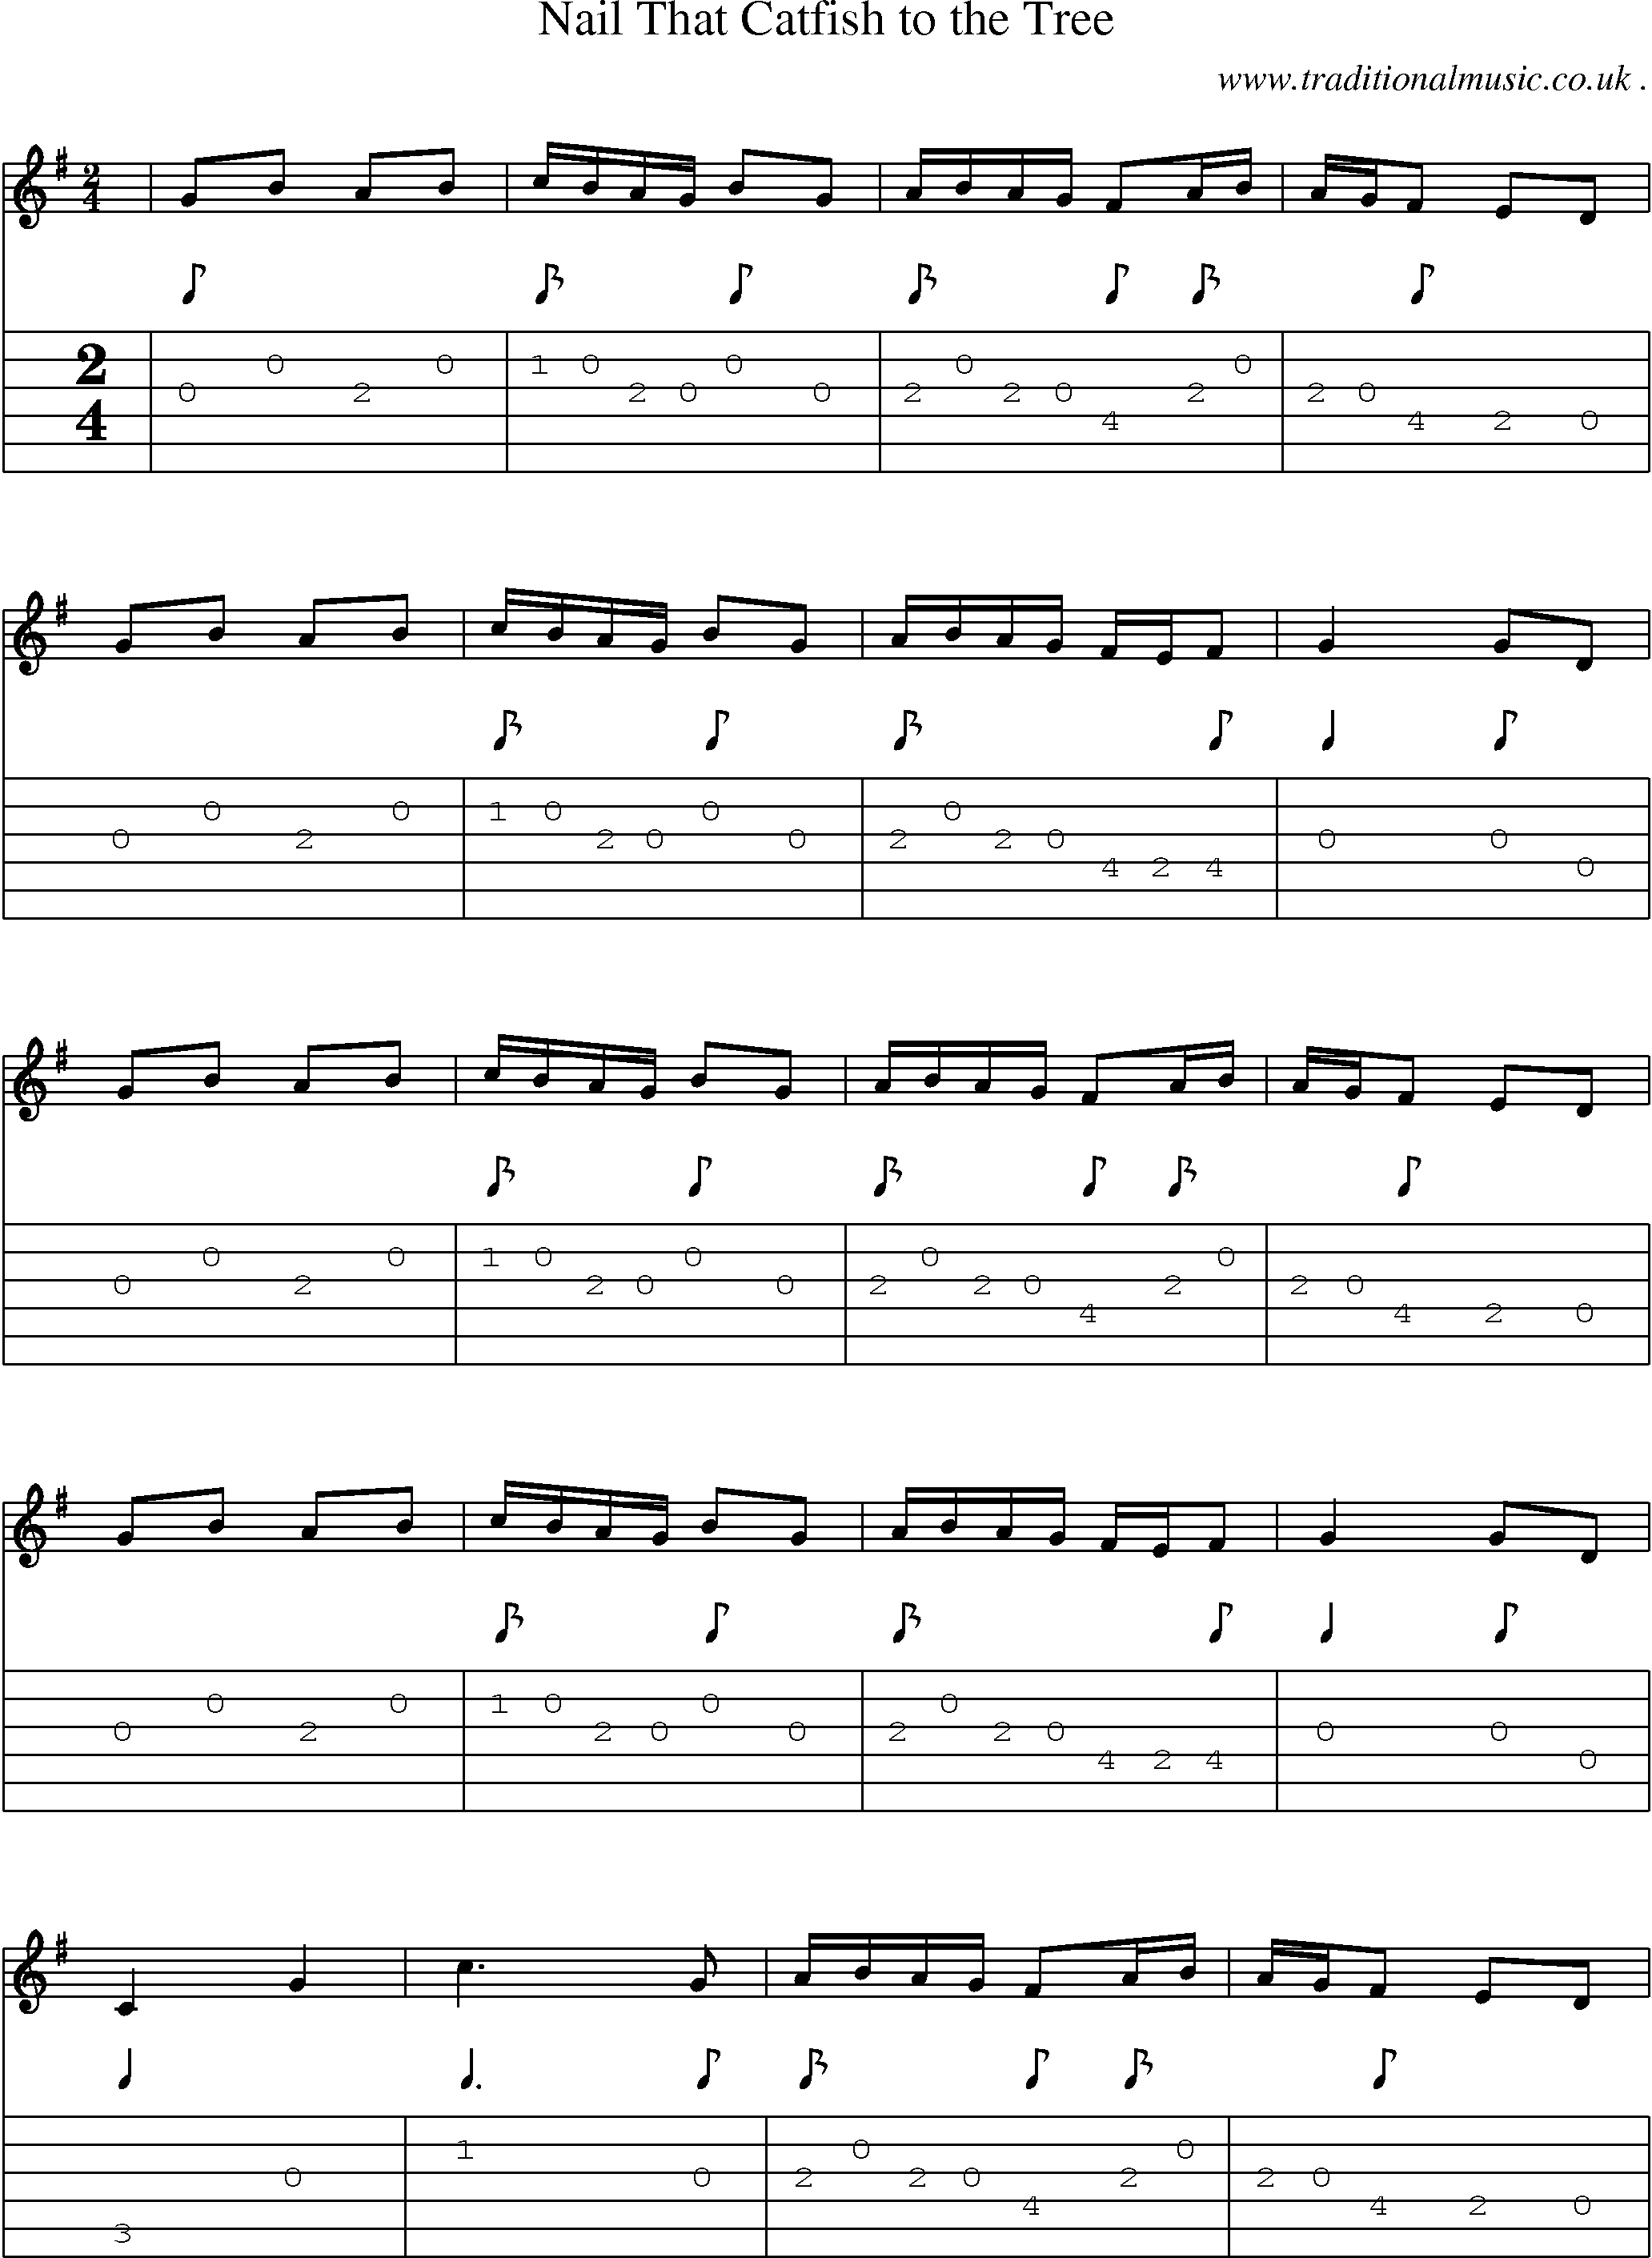 Sheet-Music and Guitar Tabs for Nail That Catfish To The Tree